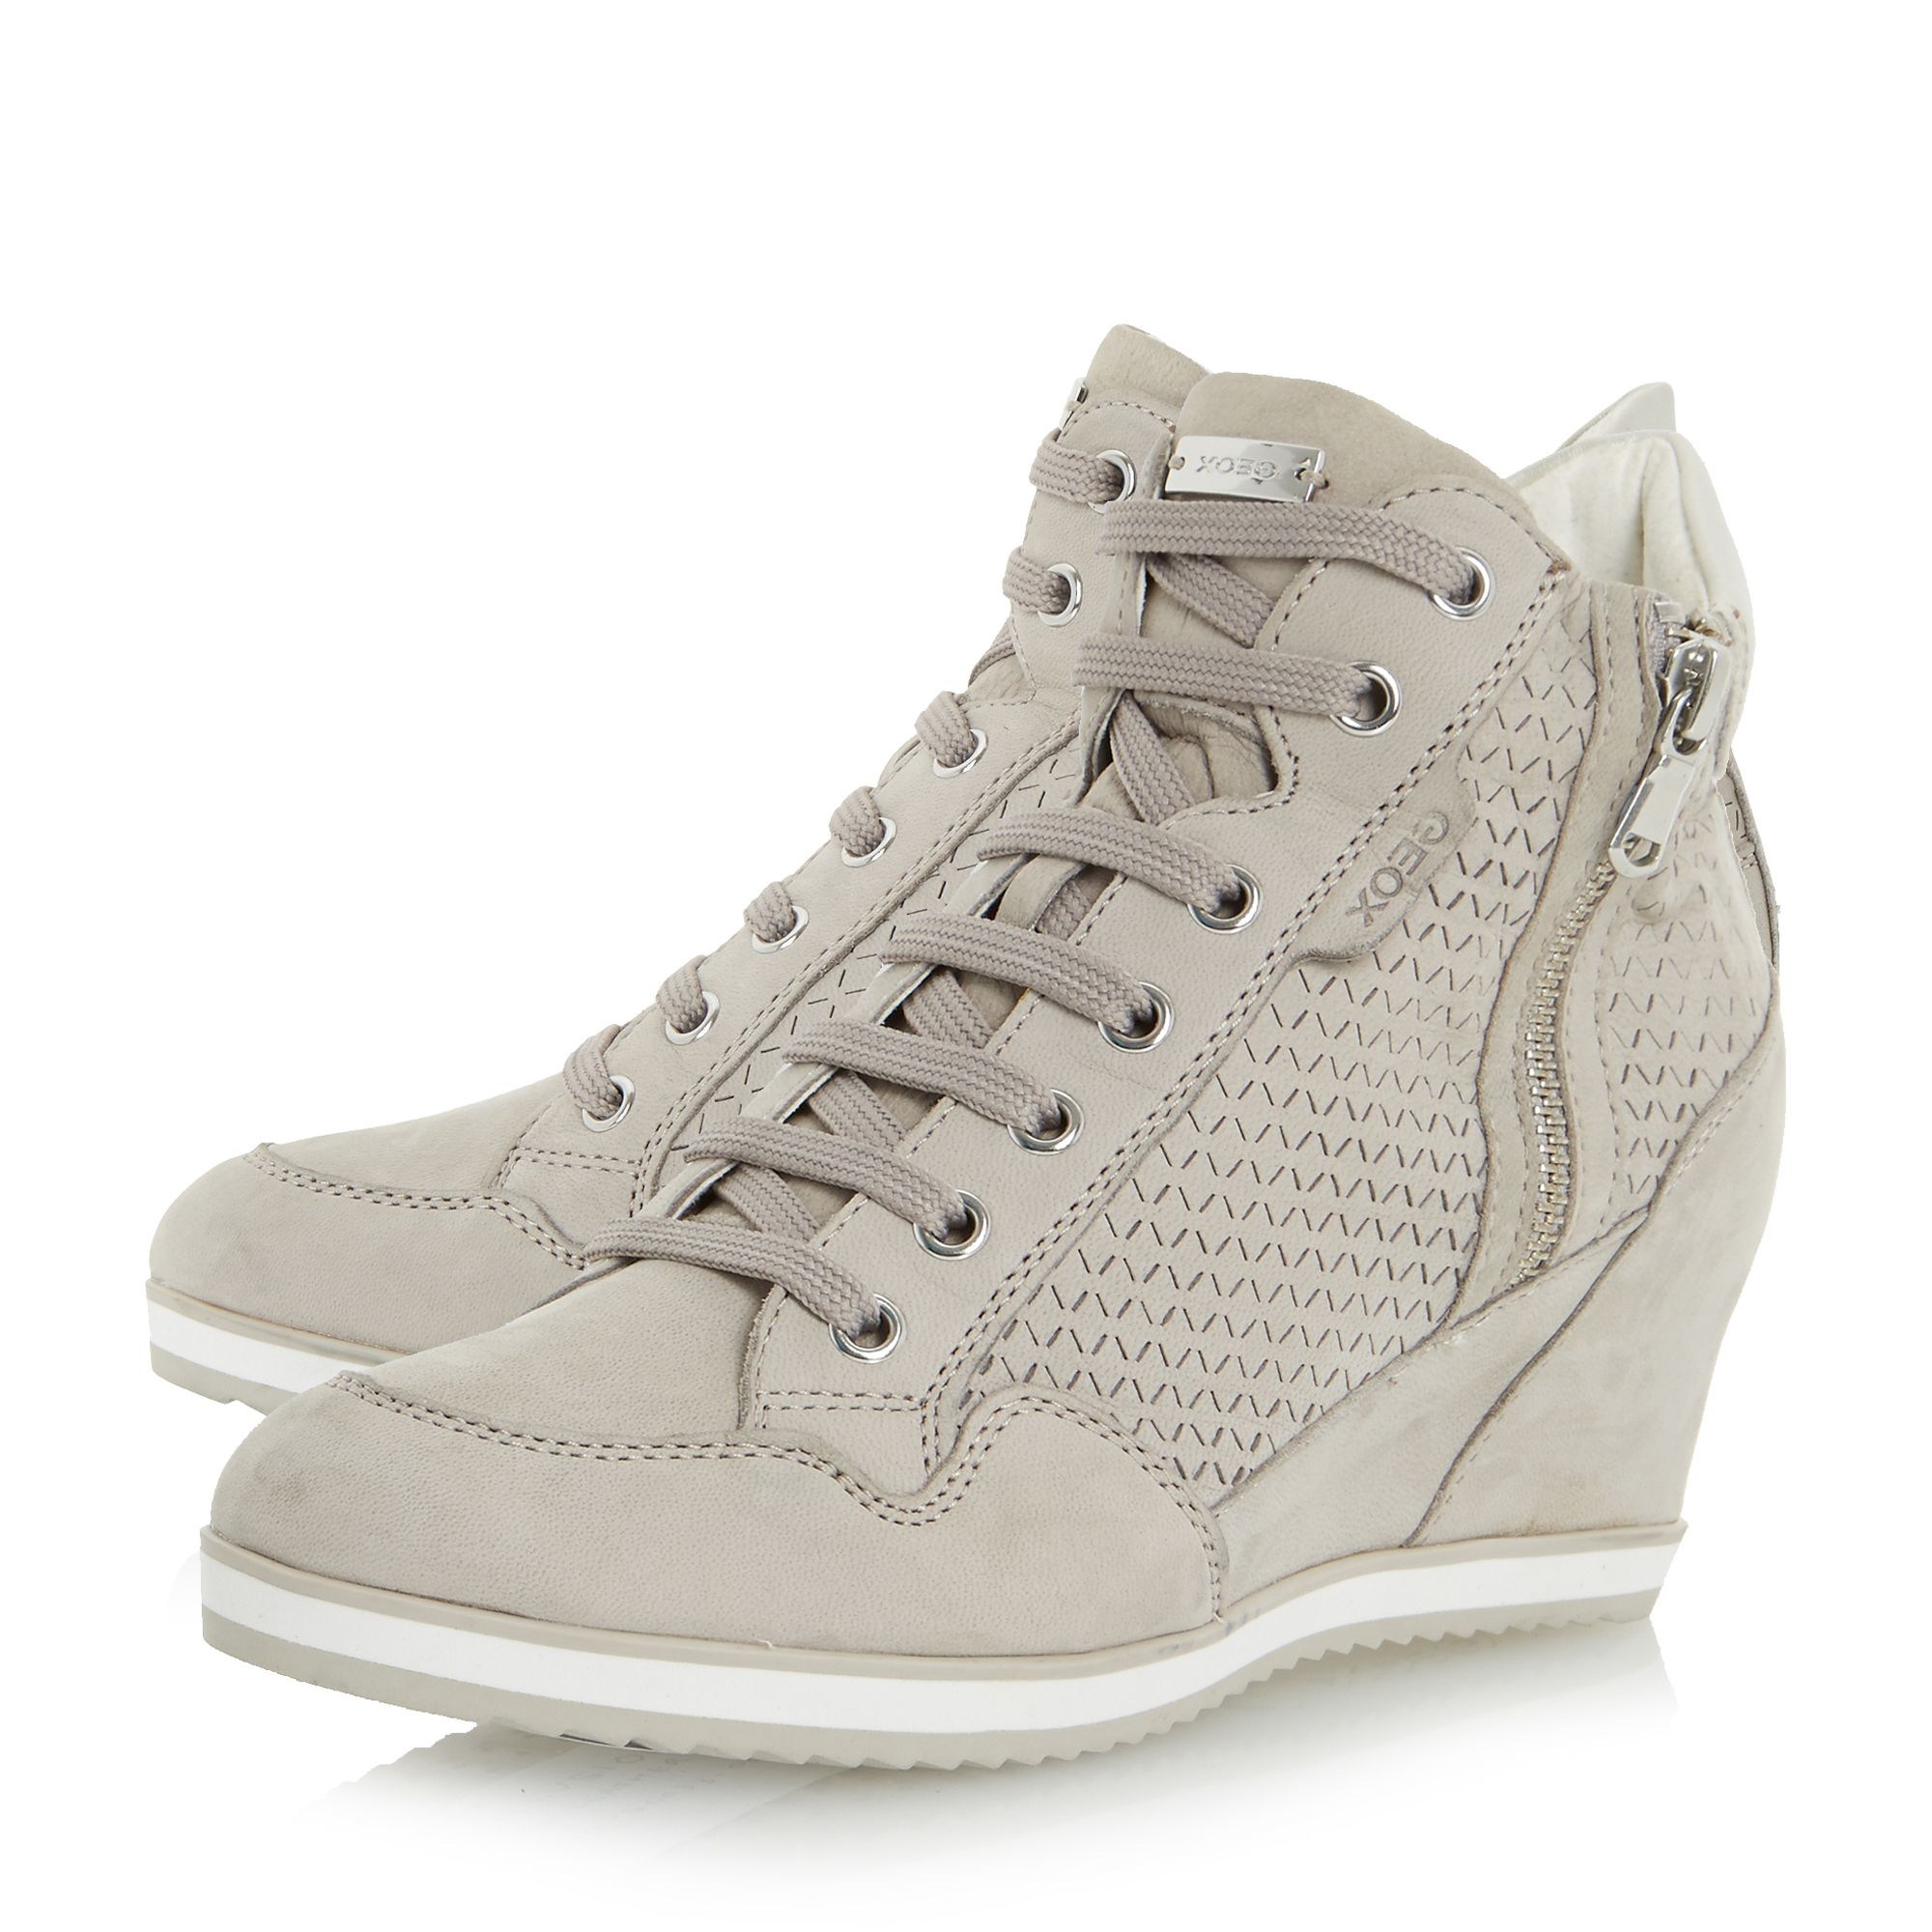 Geox Leather D Illusion Lace Up Sporty Wedge Trainers in Taupe (Gray ...